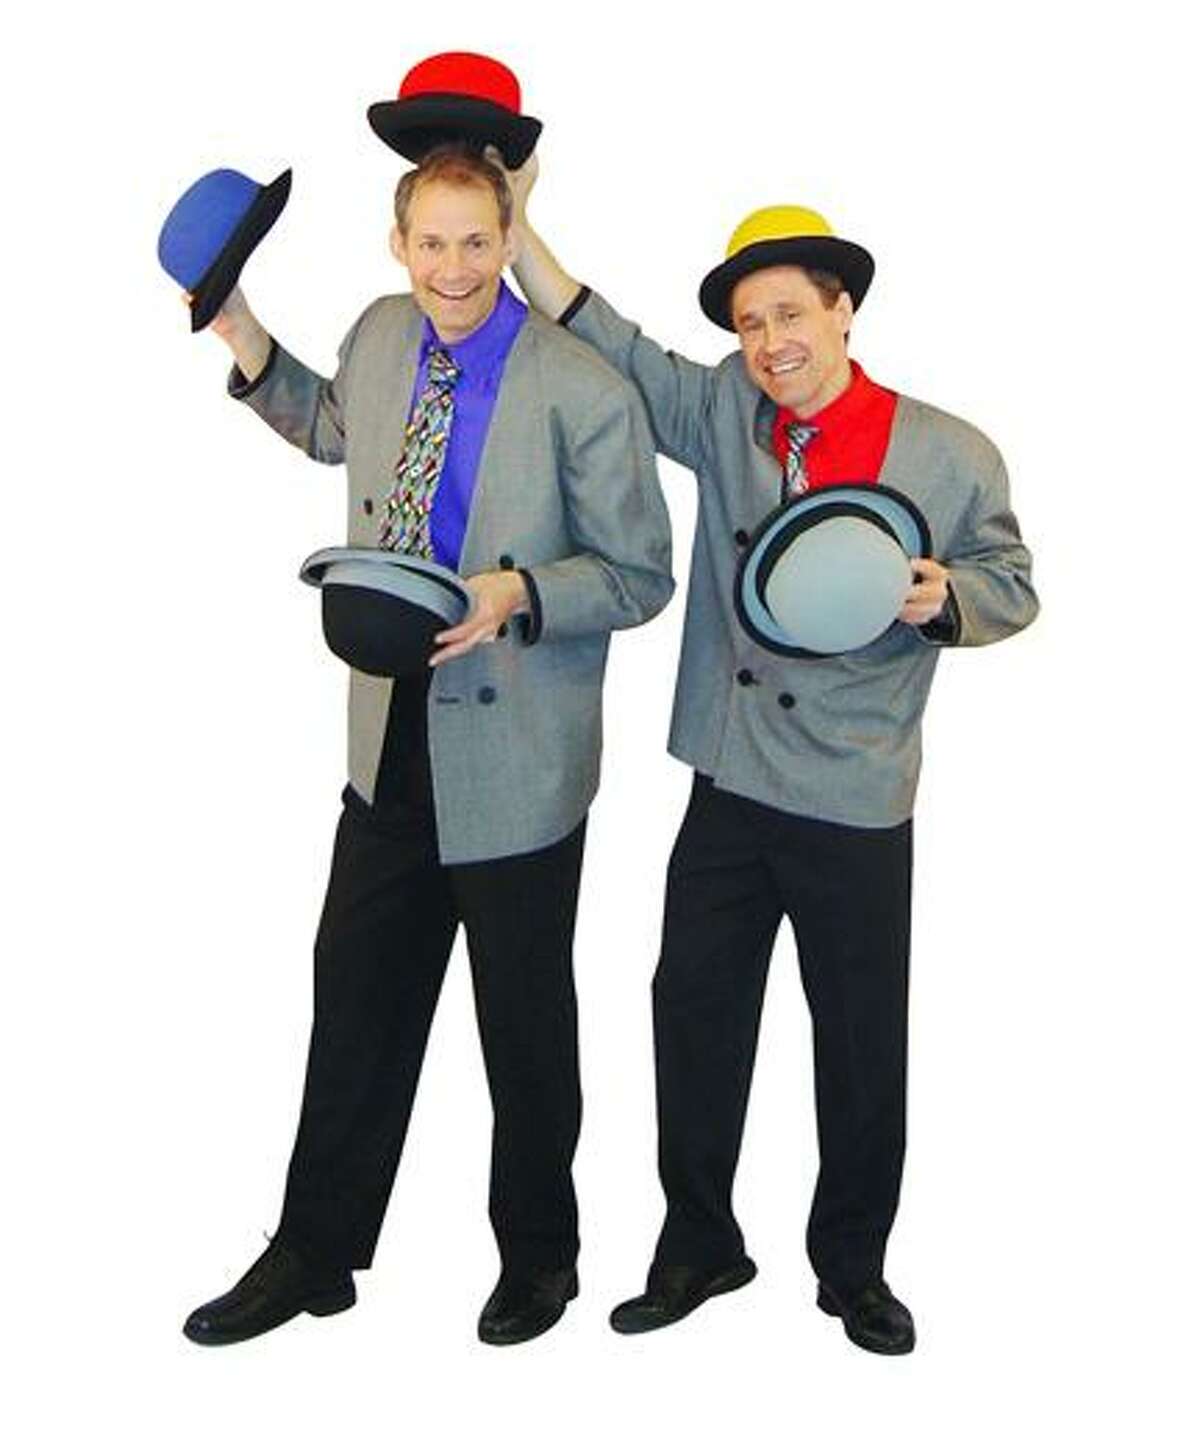 Photo from thegizmoguys.com The Gizmo Guys, Allan Jacobs and Barrett Felker, will bring their zany juggling antics to the Munson-Williams-Proctor Arts Institute Saturday, April 13, 2013, at 11 a.m. and 1 p.m.